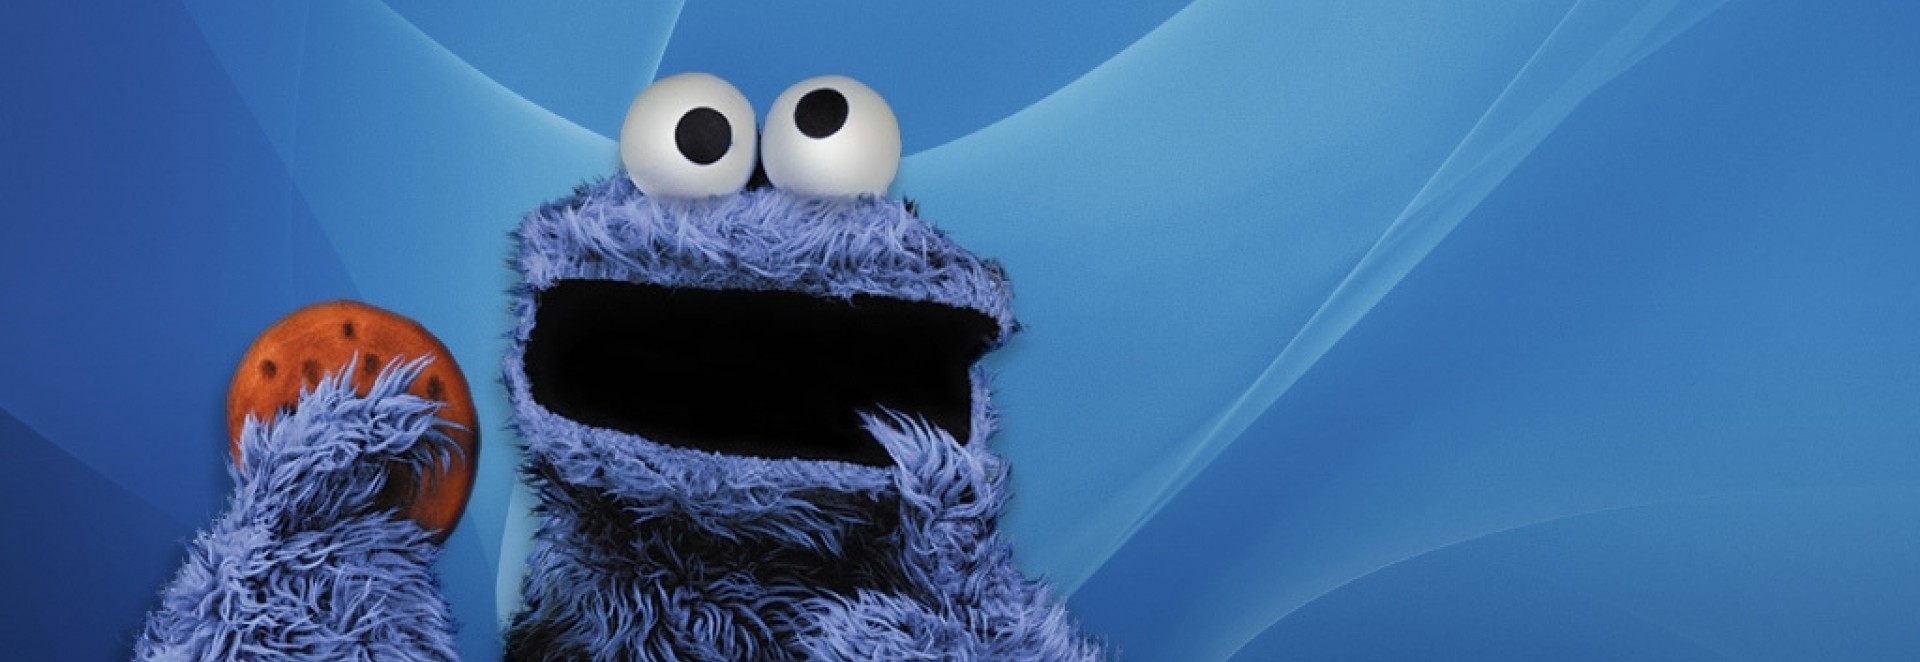 Cookie Monster Wallpaper My Party Muse